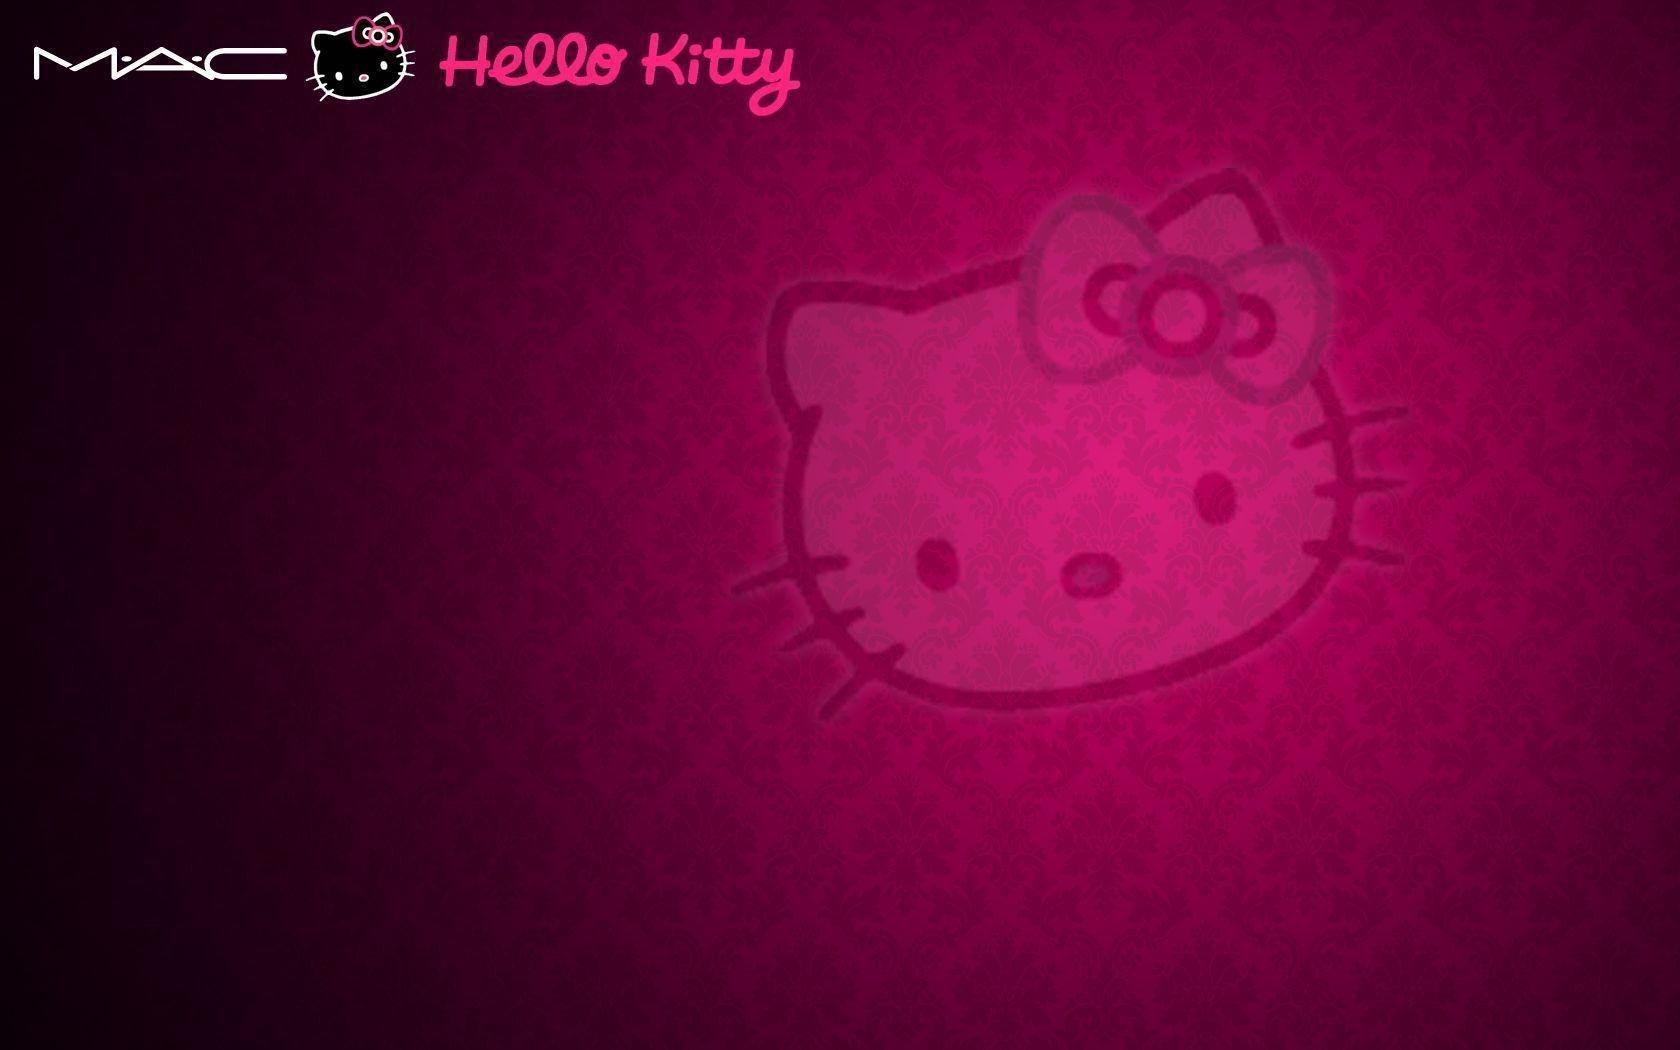 Hello Kitty Background 27 88264 High Definition Wallpaper. wallalay